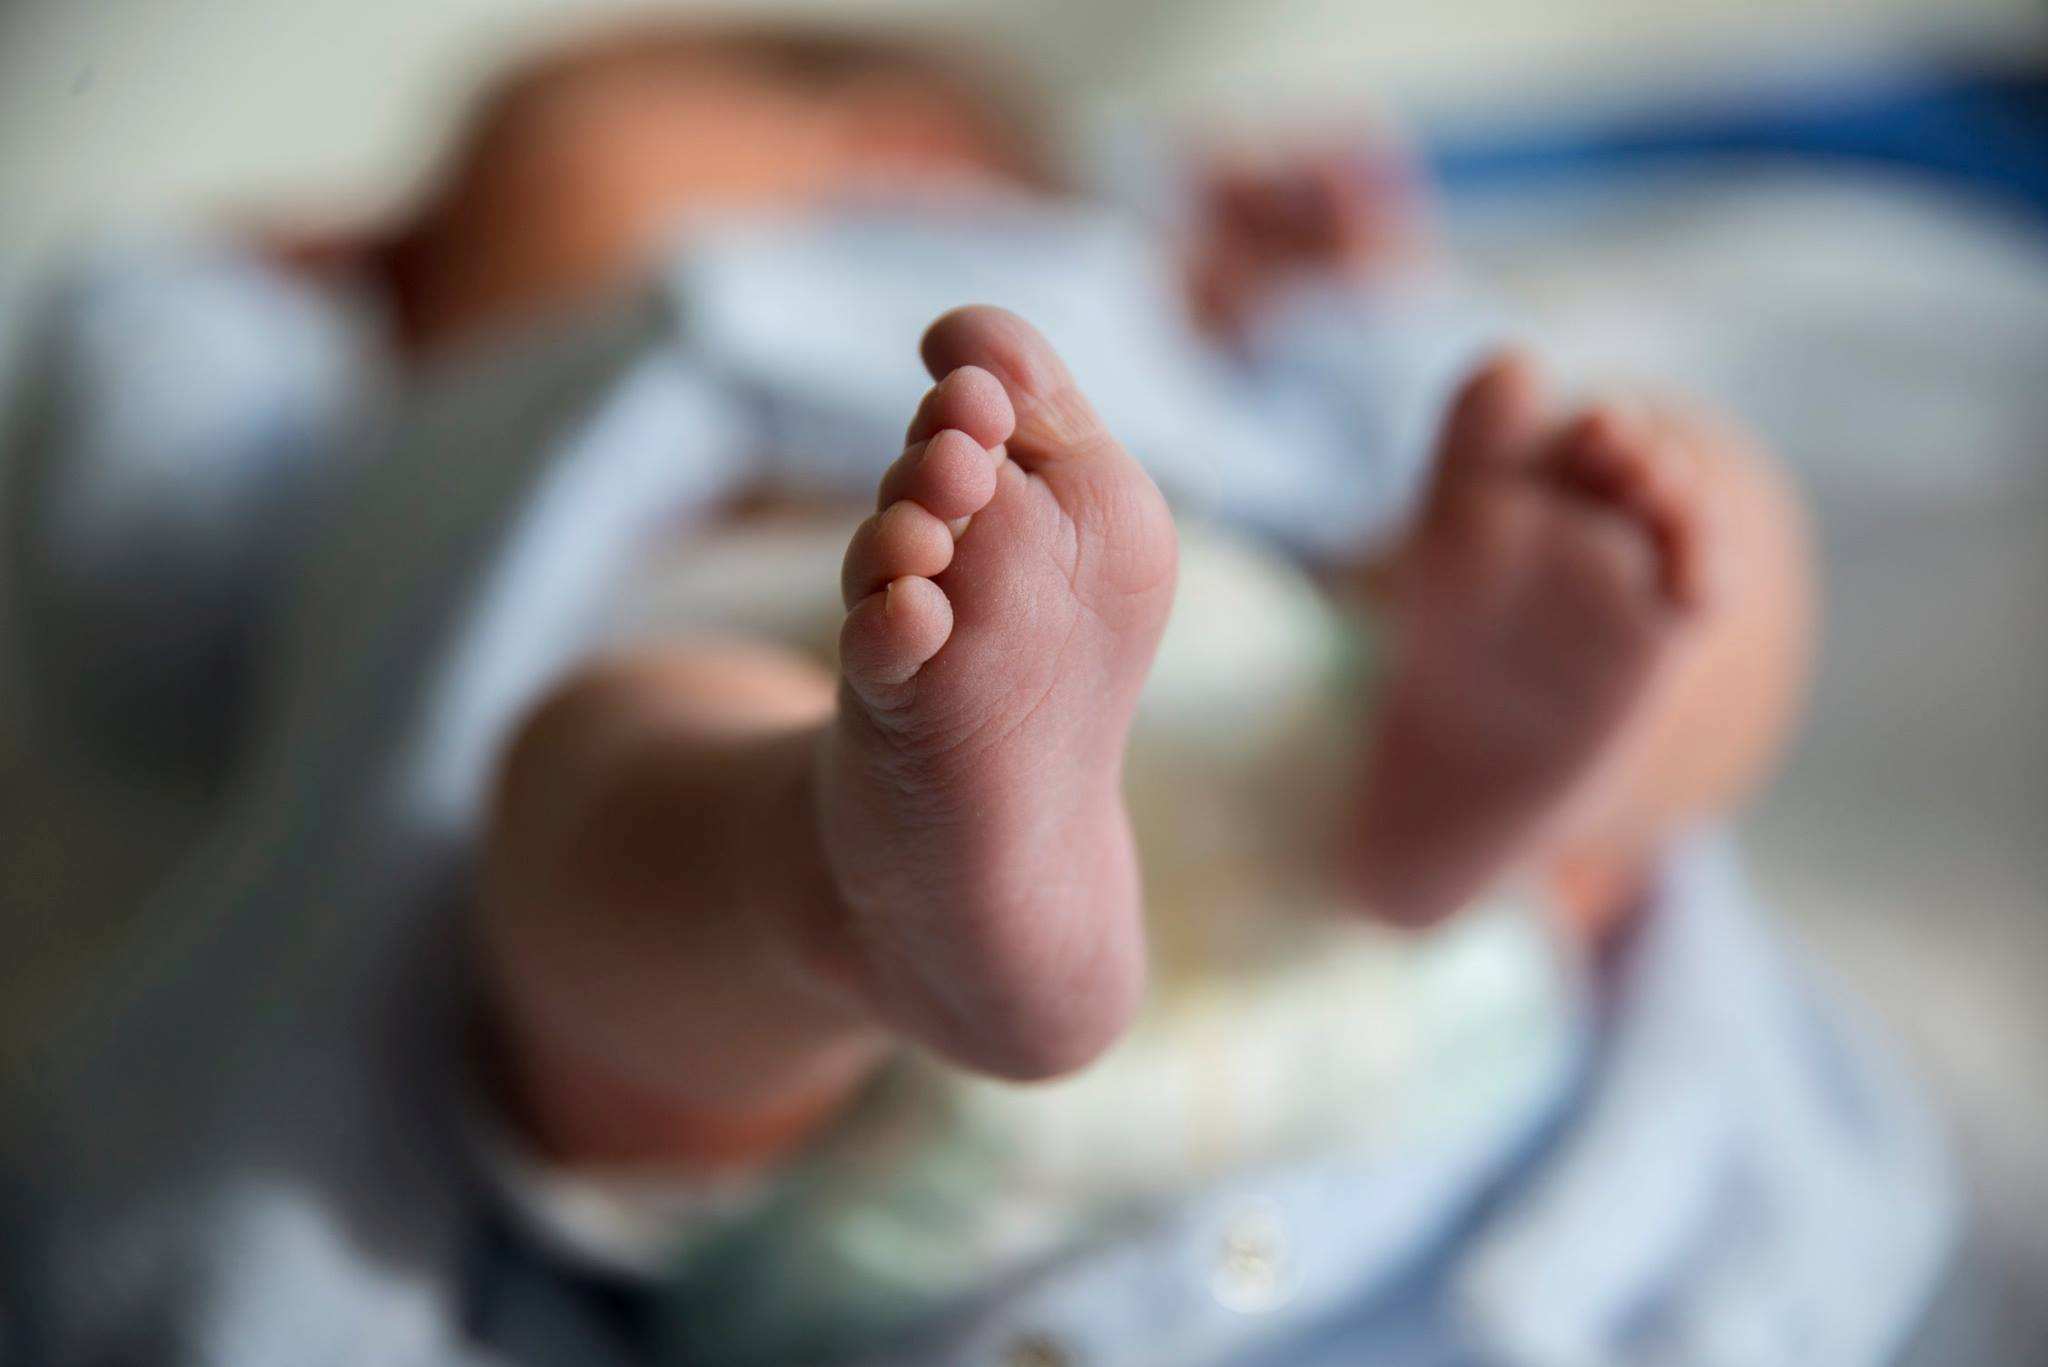 A newborn baby lying down, with one of its feet in the foreground of the image.